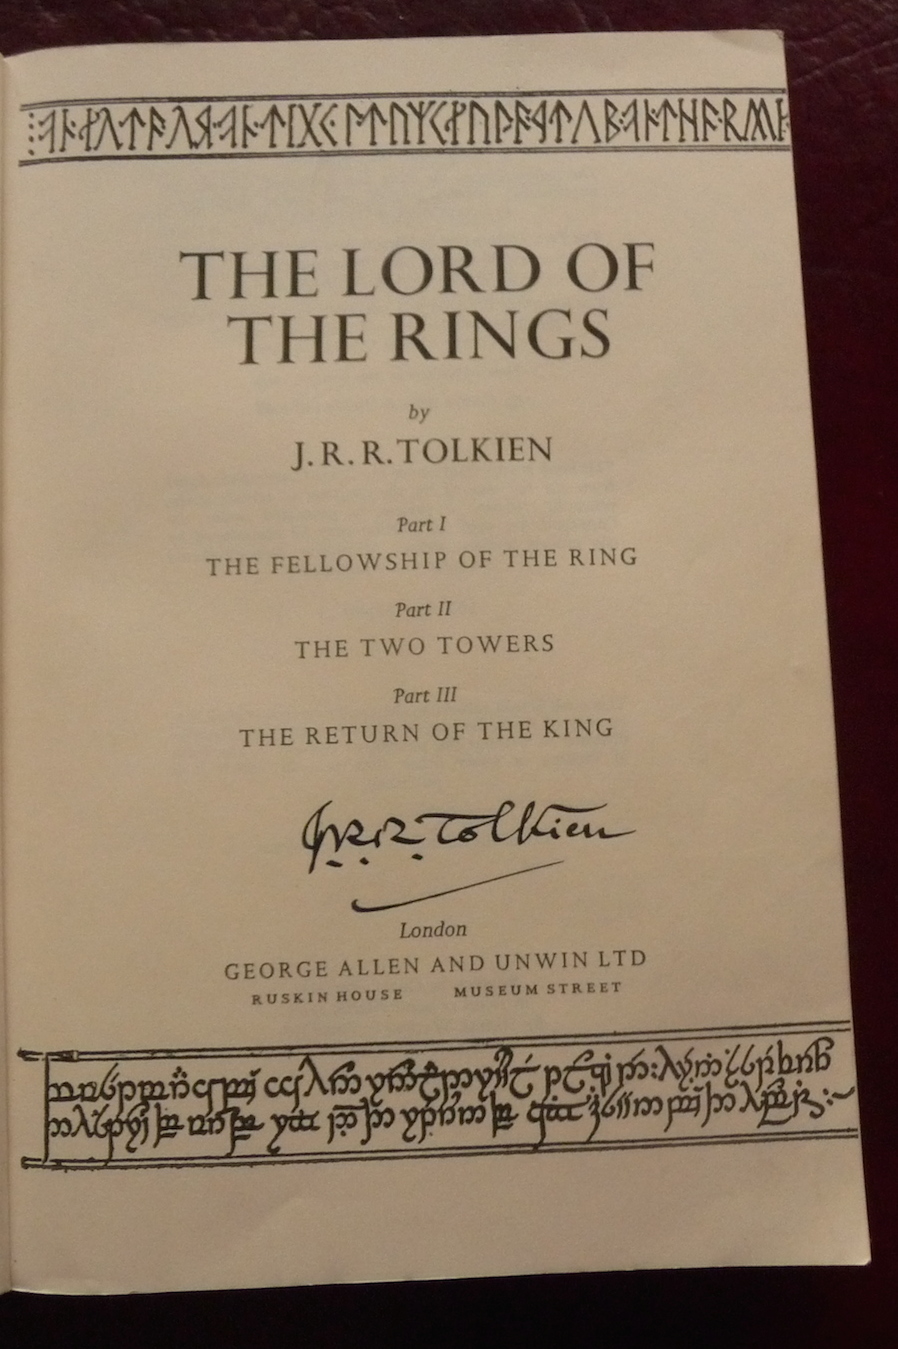 Lord of the Rings one volume with Tolkien autograph